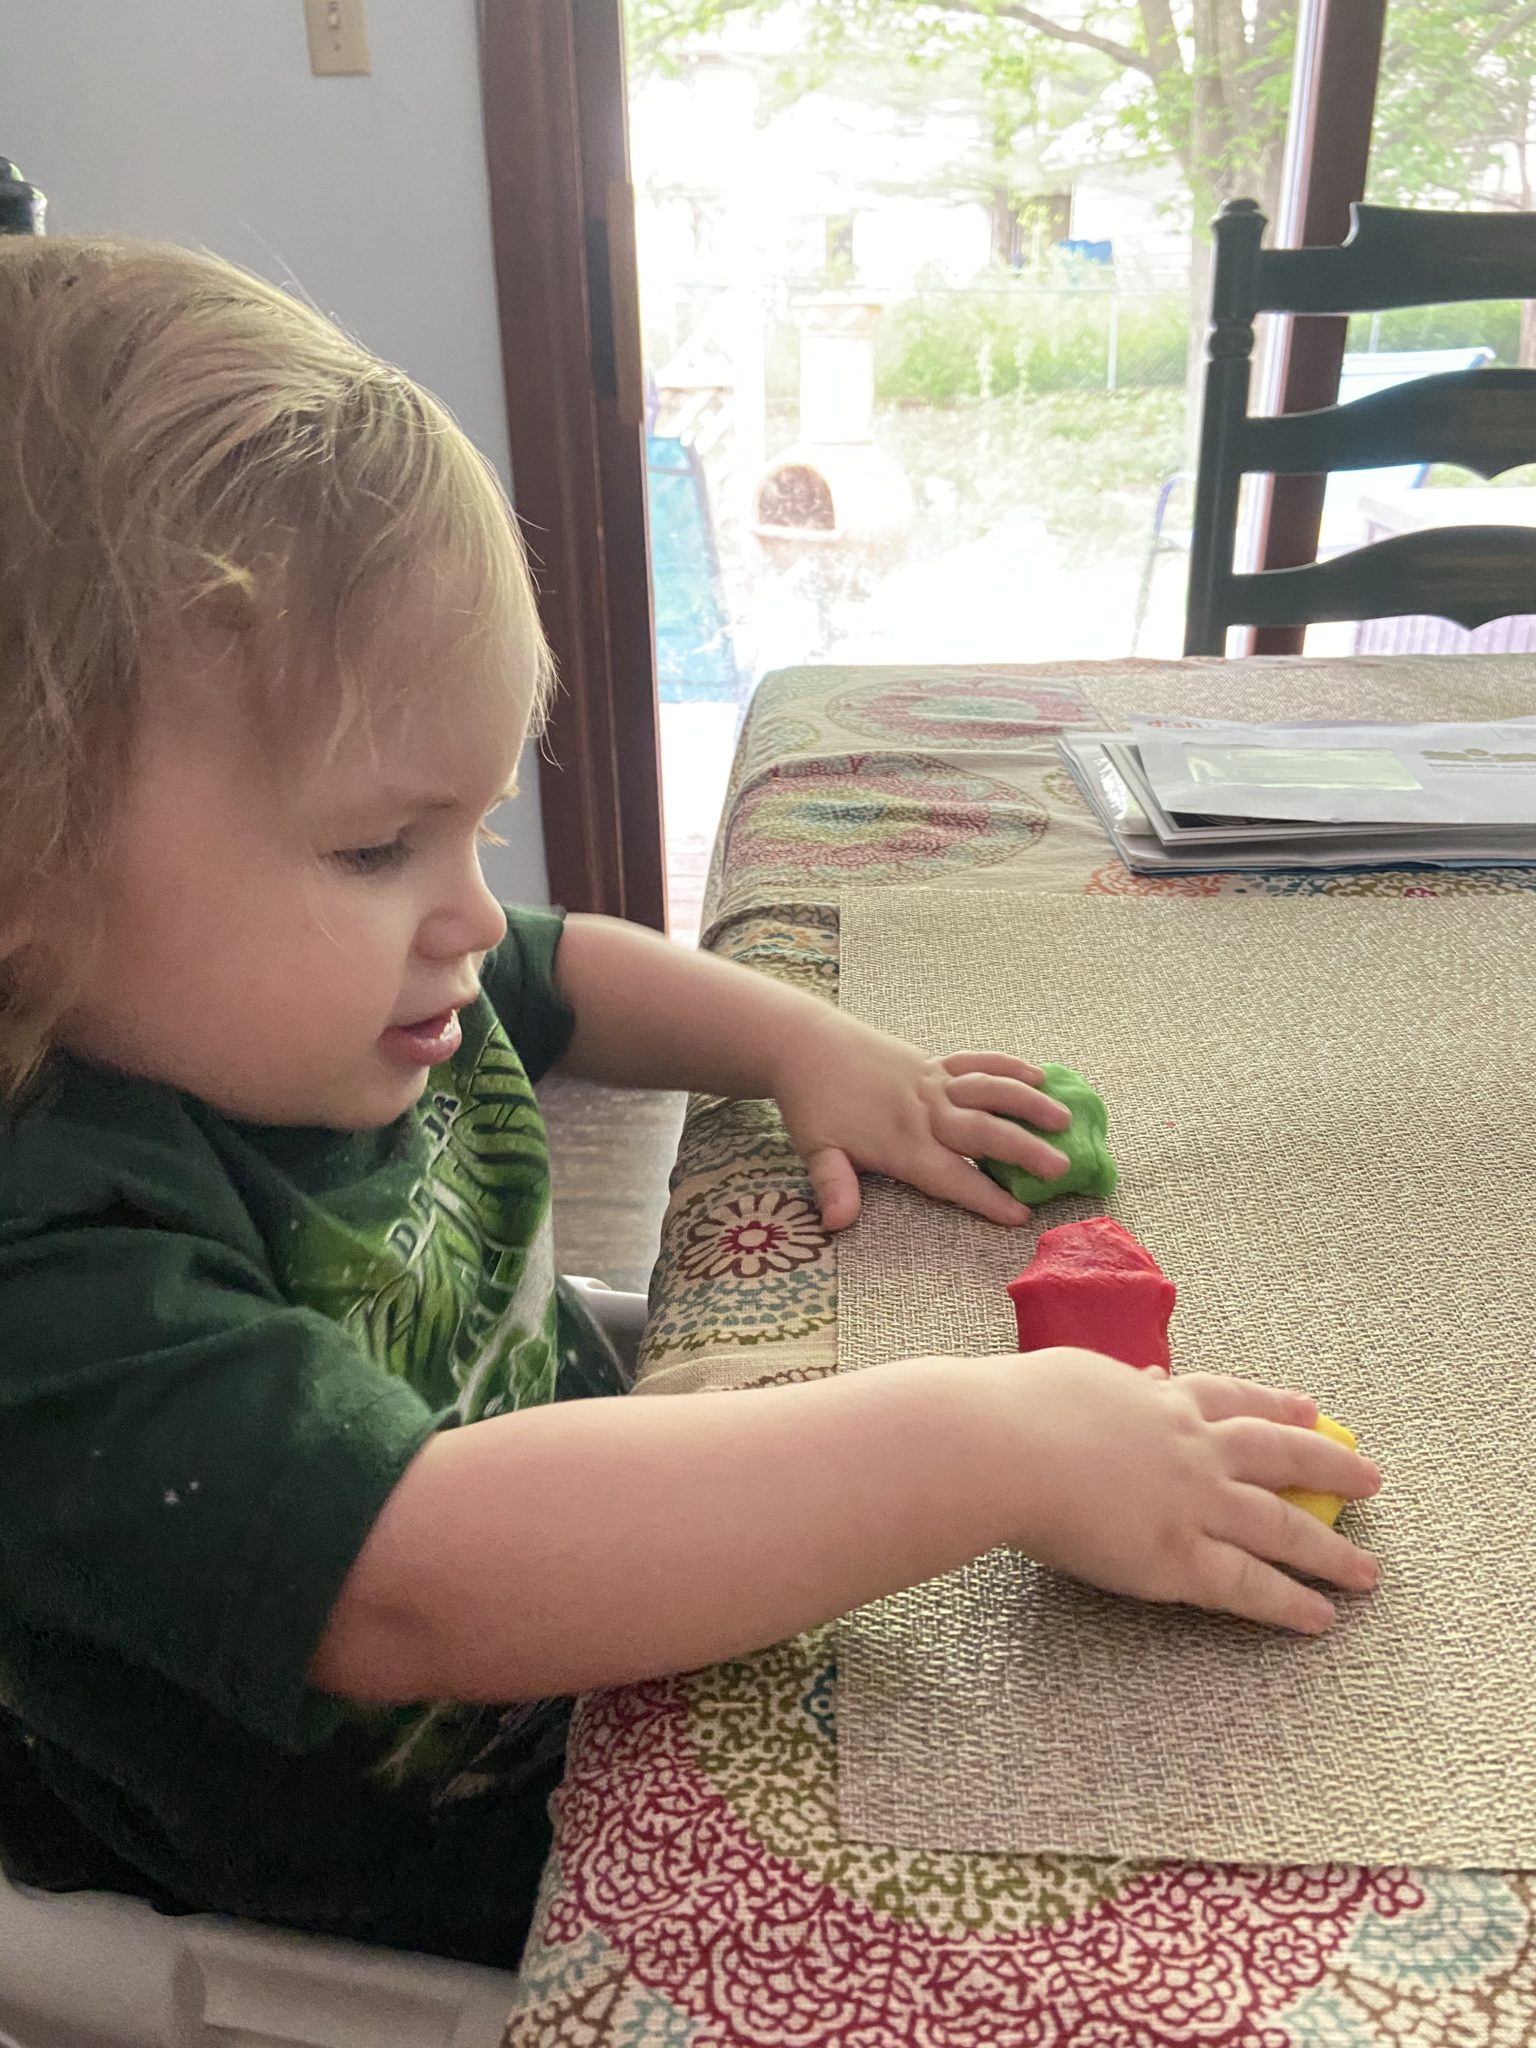 Child playing with play dough